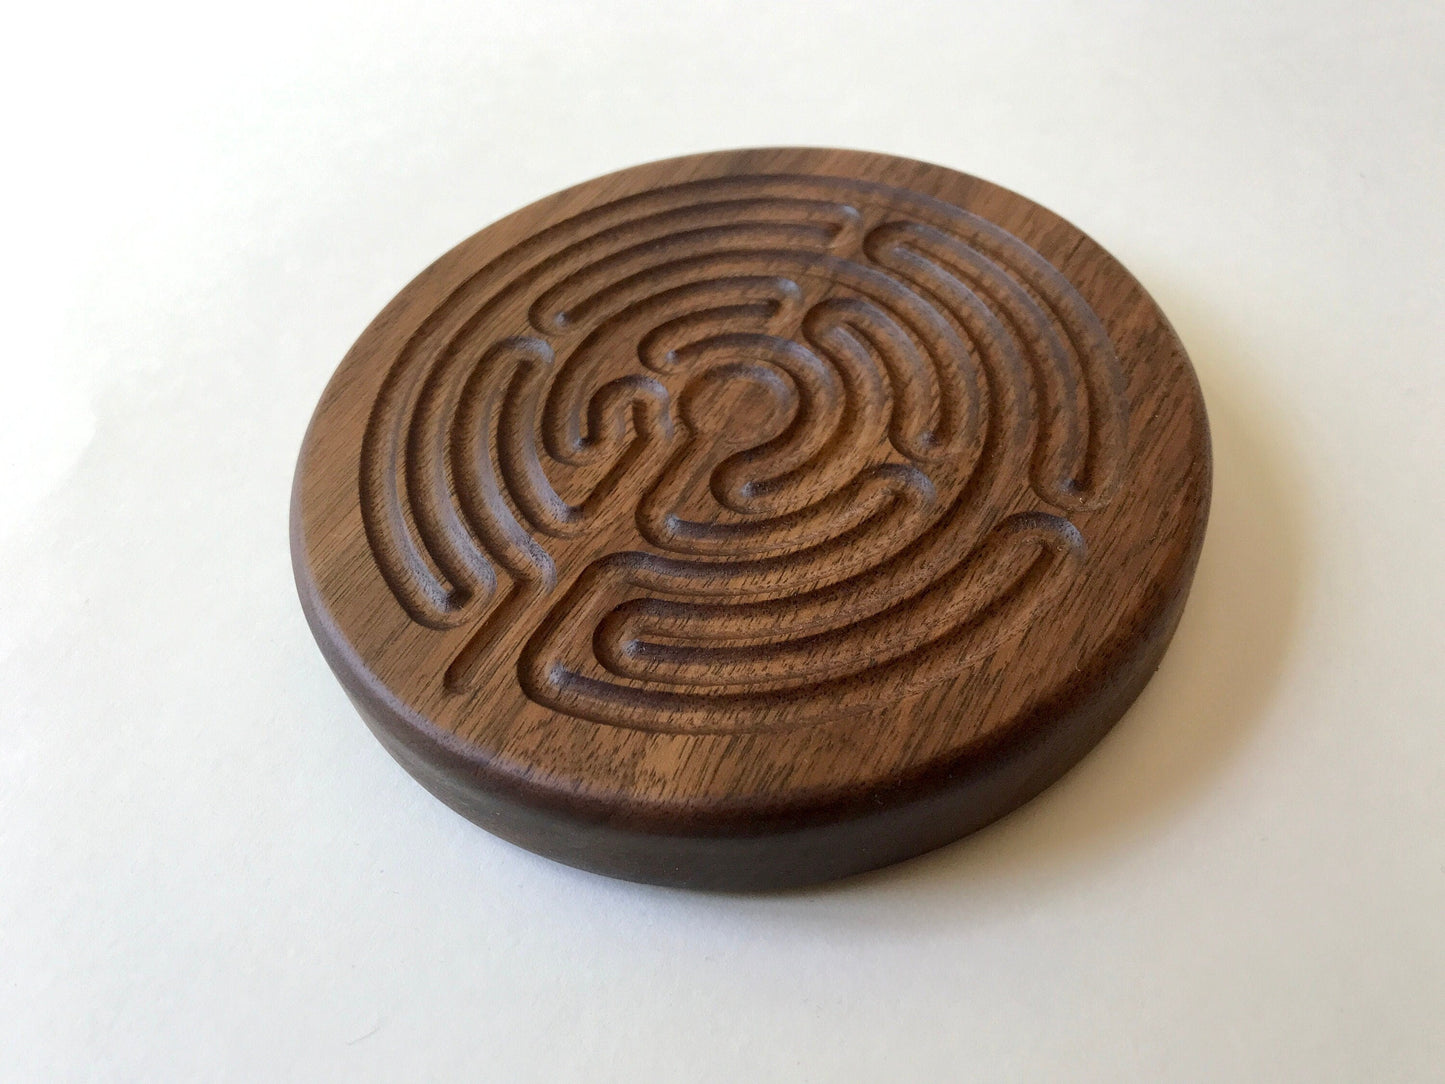 Small Chartres-style Finger Labyrinth, Walnut Wood, 4.75" diameter